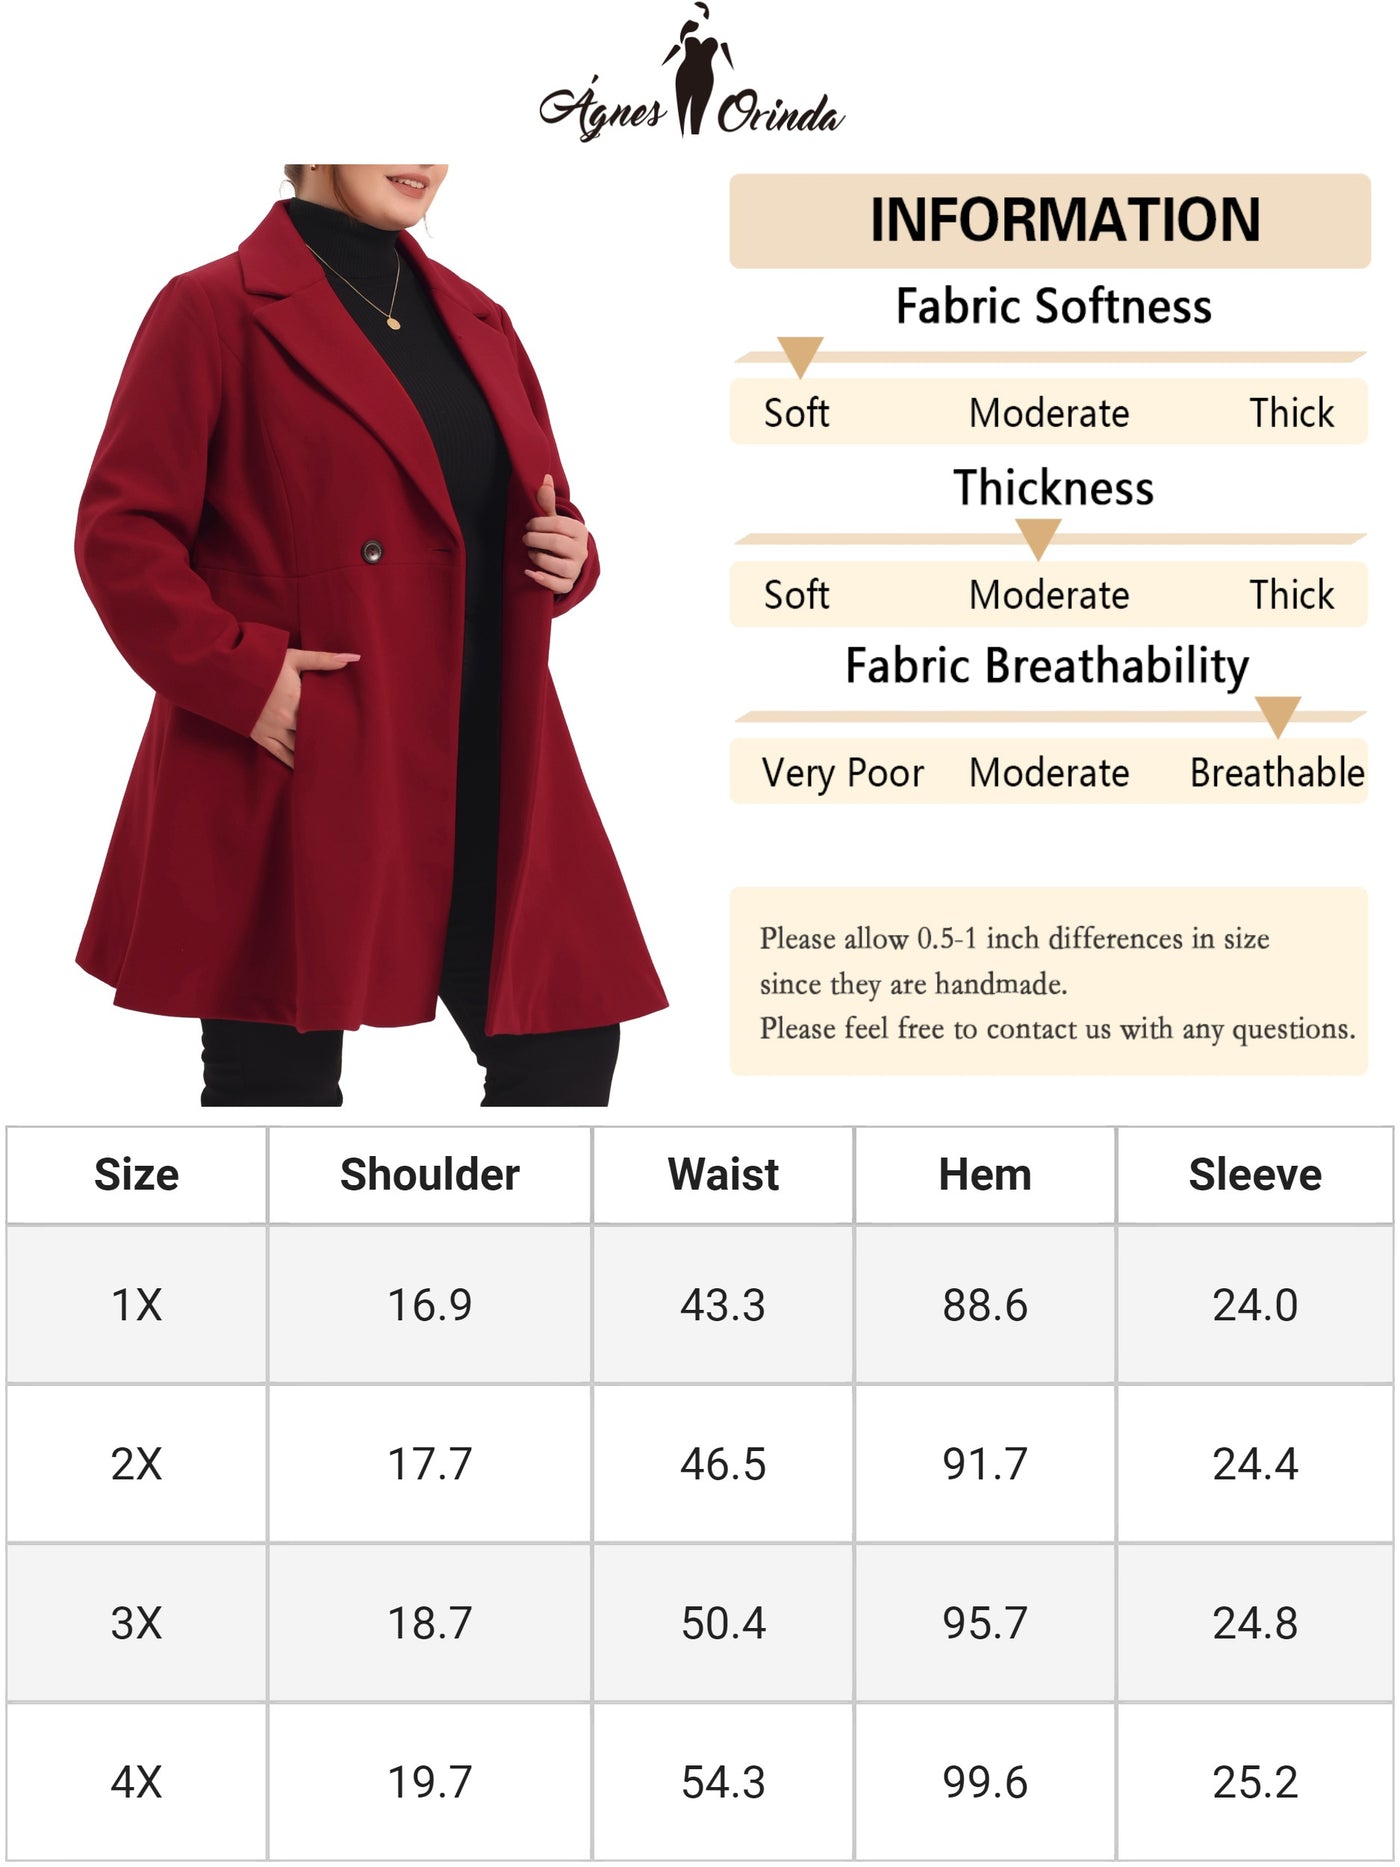 Bublédon Plus Size Peacoat for Women Elegant Notched Lapel Double Breasted Long Trench Coat